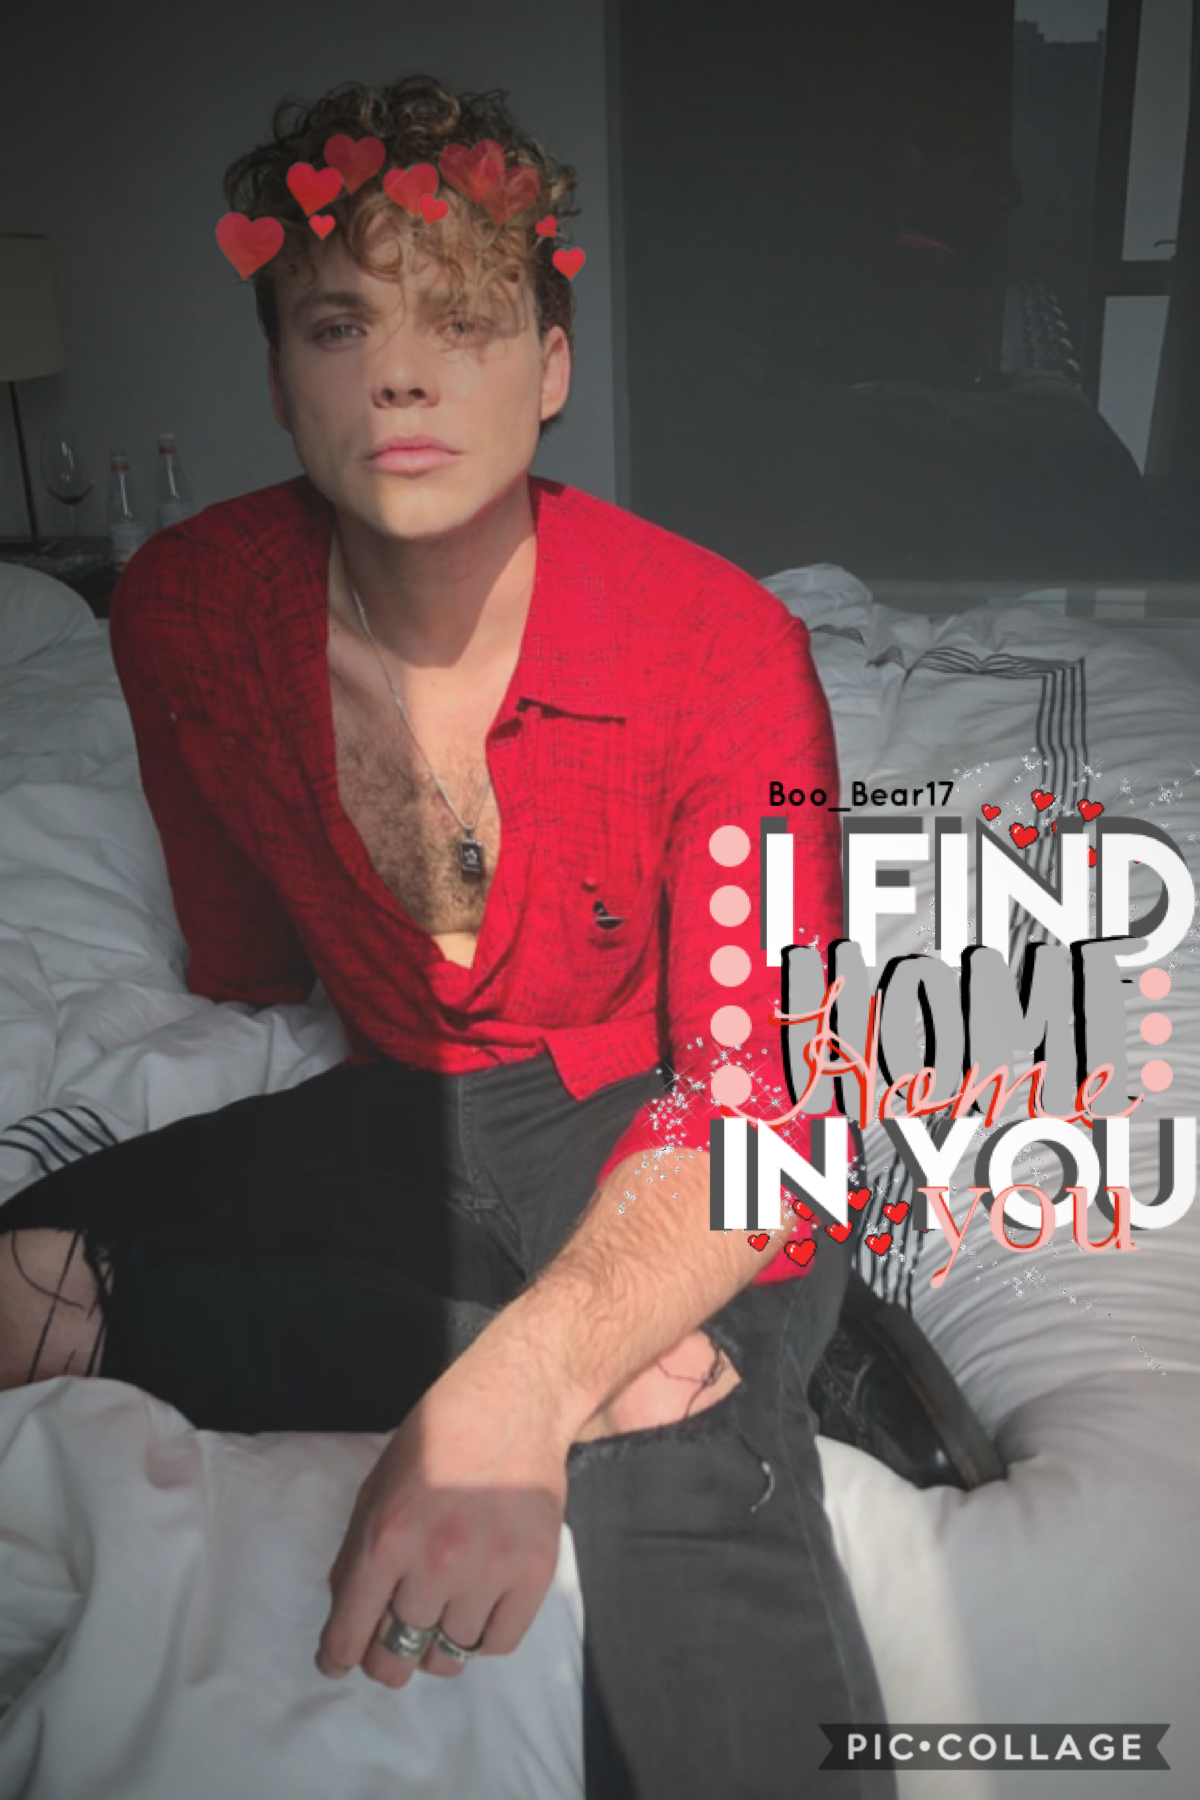 ❤️I find home in you❤️
•-seacritter- on pc challenged people to make an “ugly collage” and step out your comfort zone, this is mine cuz I think it’s a lot but I’m posting it anyway
•song rec: Why by Shawn Mendes